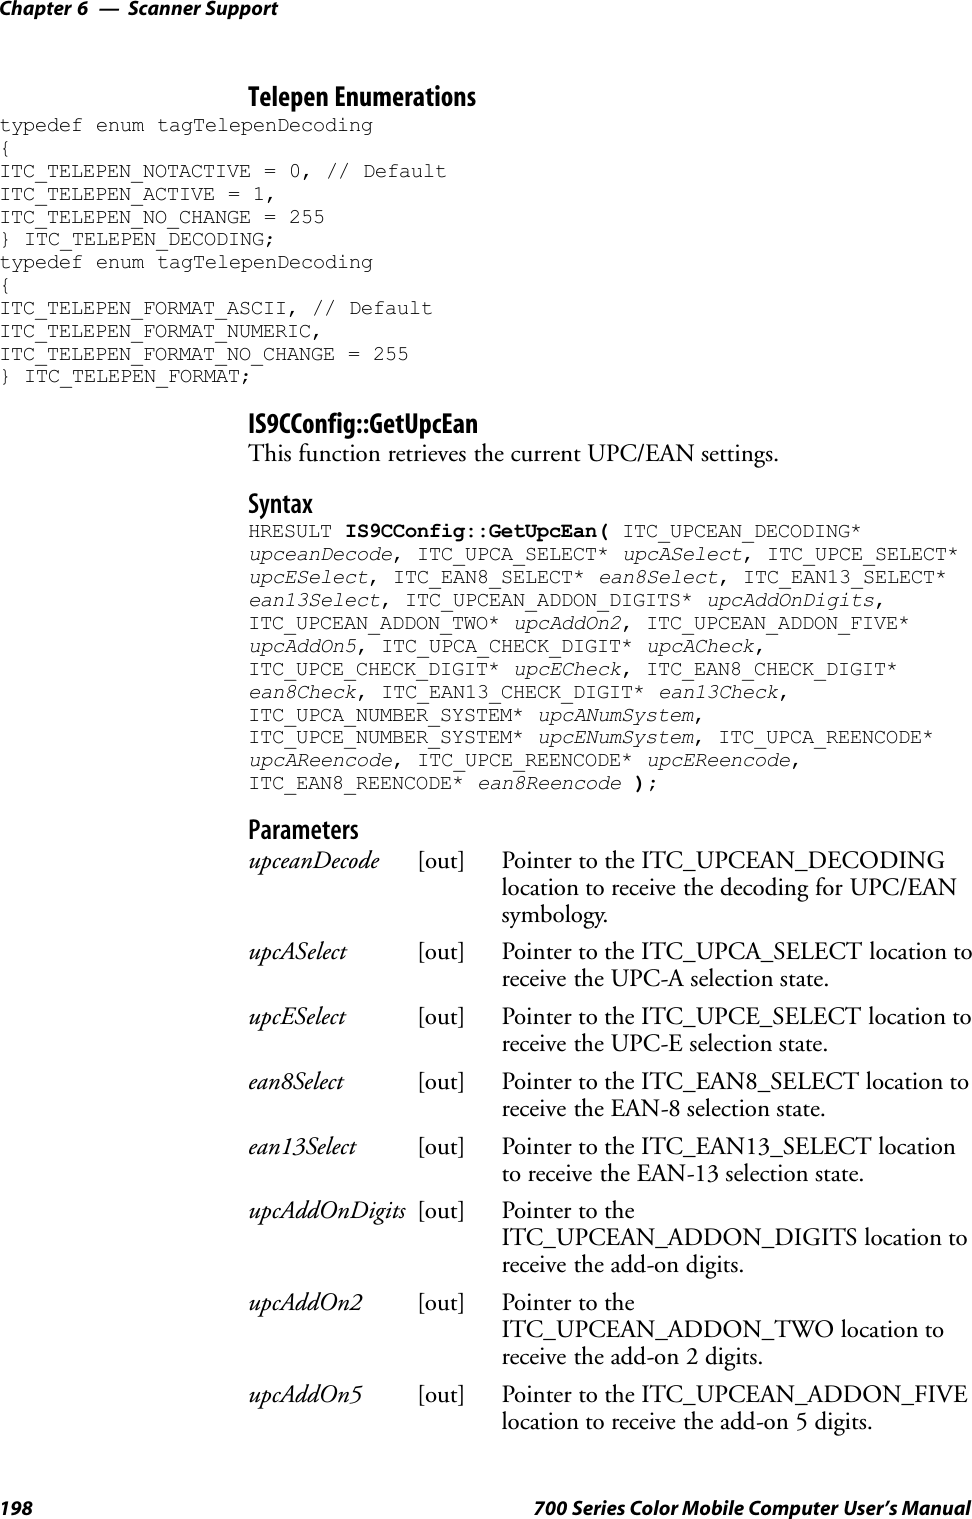 Scanner SupportChapter —6198 700 Series Color Mobile Computer User’s ManualTelepen Enumerationstypedef enum tagTelepenDecoding{ITC_TELEPEN_NOTACTIVE = 0, // DefaultITC_TELEPEN_ACTIVE = 1,ITC_TELEPEN_NO_CHANGE = 255} ITC_TELEPEN_DECODING;typedef enum tagTelepenDecoding{ITC_TELEPEN_FORMAT_ASCII, // DefaultITC_TELEPEN_FORMAT_NUMERIC,ITC_TELEPEN_FORMAT_NO_CHANGE = 255} ITC_TELEPEN_FORMAT;IS9CConfig::GetUpcEanThis function retrieves the current UPC/EAN settings.SyntaxHRESULT IS9CConfig::GetUpcEan( ITC_UPCEAN_DECODING*upceanDecode, ITC_UPCA_SELECT* upcASelect, ITC_UPCE_SELECT*upcESelect, ITC_EAN8_SELECT* ean8Select, ITC_EAN13_SELECT*ean13Select, ITC_UPCEAN_ADDON_DIGITS* upcAddOnDigits,ITC_UPCEAN_ADDON_TWO* upcAddOn2, ITC_UPCEAN_ADDON_FIVE*upcAddOn5, ITC_UPCA_CHECK_DIGIT* upcACheck,ITC_UPCE_CHECK_DIGIT* upcECheck, ITC_EAN8_CHECK_DIGIT*ean8Check, ITC_EAN13_CHECK_DIGIT* ean13Check,ITC_UPCA_NUMBER_SYSTEM* upcANumSystem,ITC_UPCE_NUMBER_SYSTEM* upcENumSystem, ITC_UPCA_REENCODE*upcAReencode, ITC_UPCE_REENCODE* upcEReencode,ITC_EAN8_REENCODE* ean8Reencode );ParametersupceanDecode [out] Pointer to the ITC_UPCEAN_DECODINGlocation to receive the decoding for UPC/EANsymbology.upcASelect [out] Pointer to the ITC_UPCA_SELECT location toreceive the UPC-A selection state.upcESelect [out] Pointer to the ITC_UPCE_SELECT location toreceive the UPC-E selection state.ean8Select [out] Pointer to the ITC_EAN8_SELECT location toreceive the EAN-8 selection state.ean13Select [out] Pointer to the ITC_EAN13_SELECT locationto receive the EAN-13 selection state.upcAddOnDigits [out] Pointer to theITC_UPCEAN_ADDON_DIGITS location toreceive the add-on digits.upcAddOn2 [out] Pointer to theITC_UPCEAN_ADDON_TWO location toreceive the add-on 2 digits.upcAddOn5 [out] Pointer to the ITC_UPCEAN_ADDON_FIVElocation to receive the add-on 5 digits.